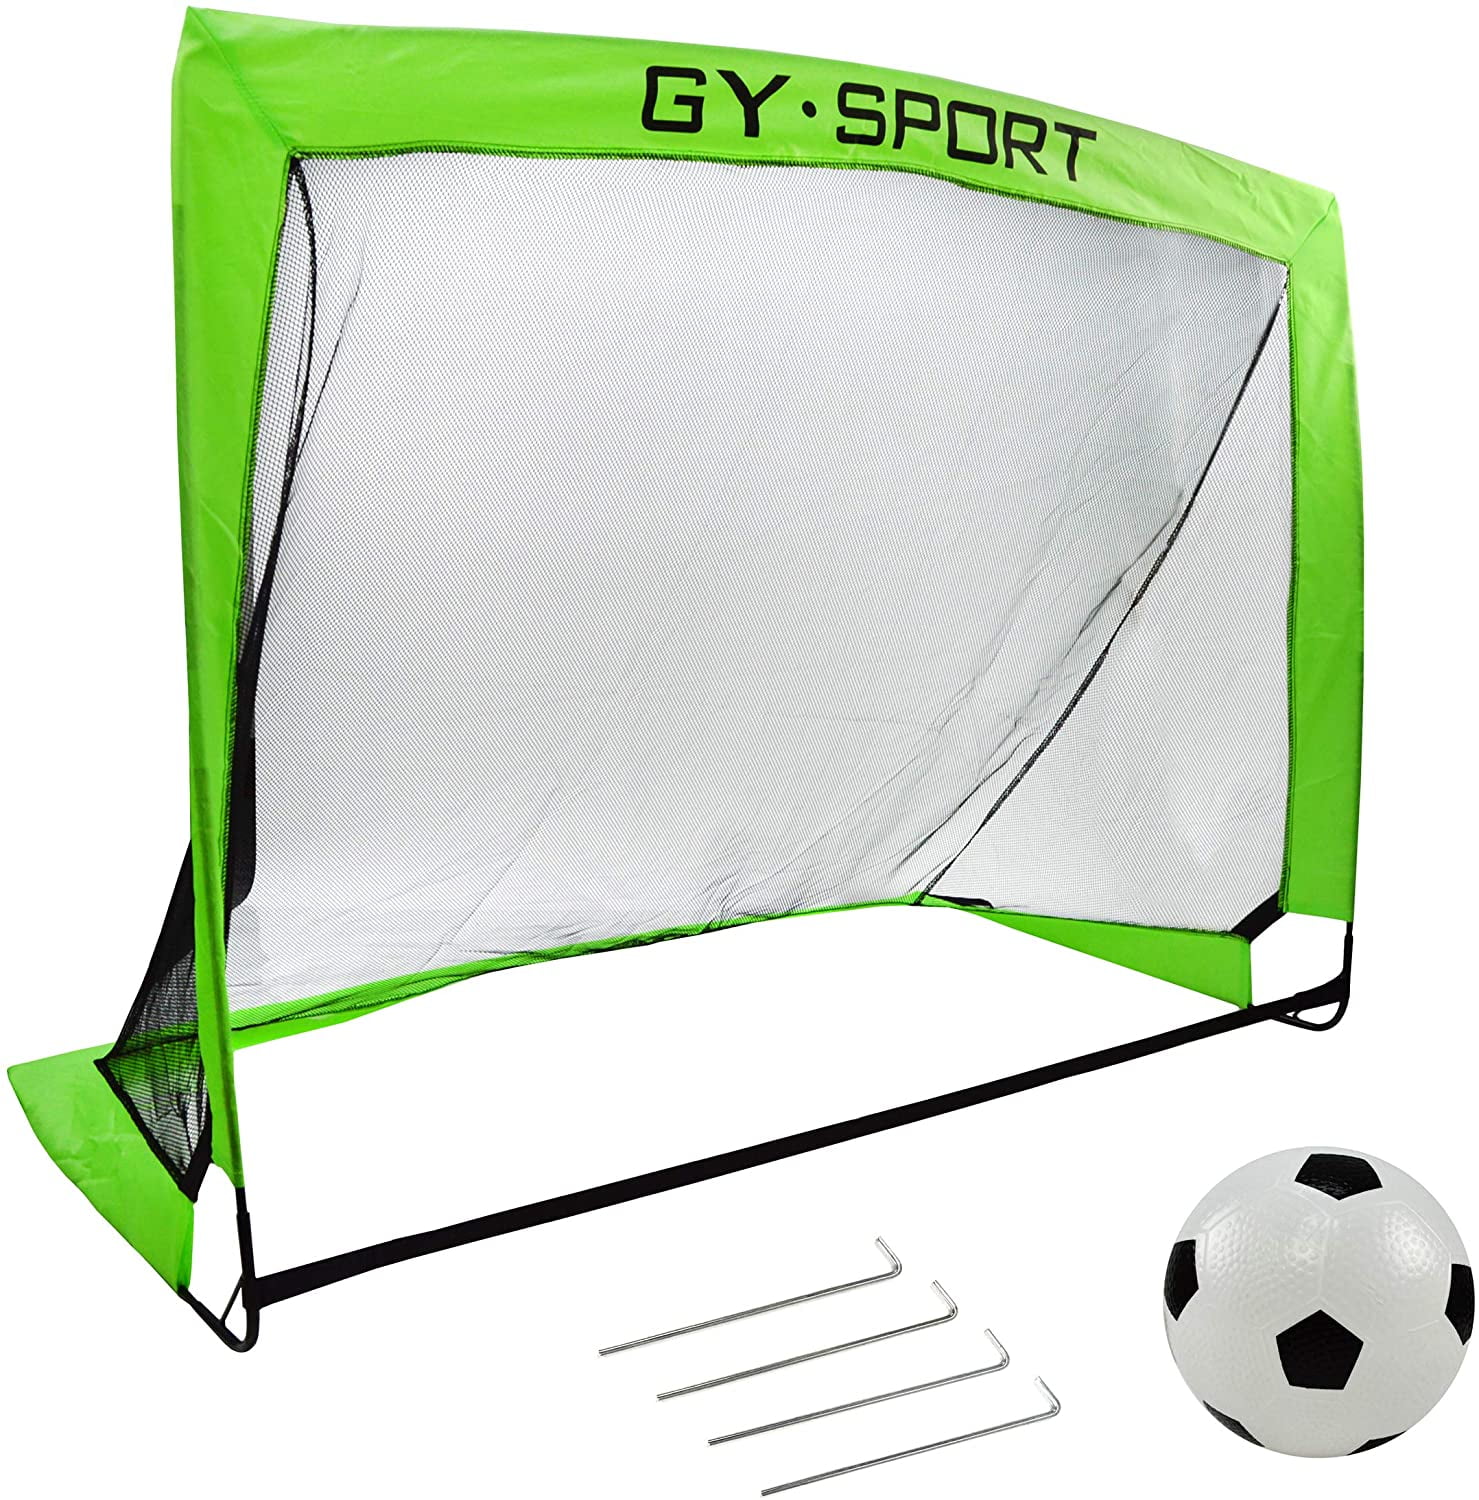 SET OF 2 SOCCER/HOCKEY GOALS WITH NETS BALL AND PUMP TWIN GOAL NEW STAKES 